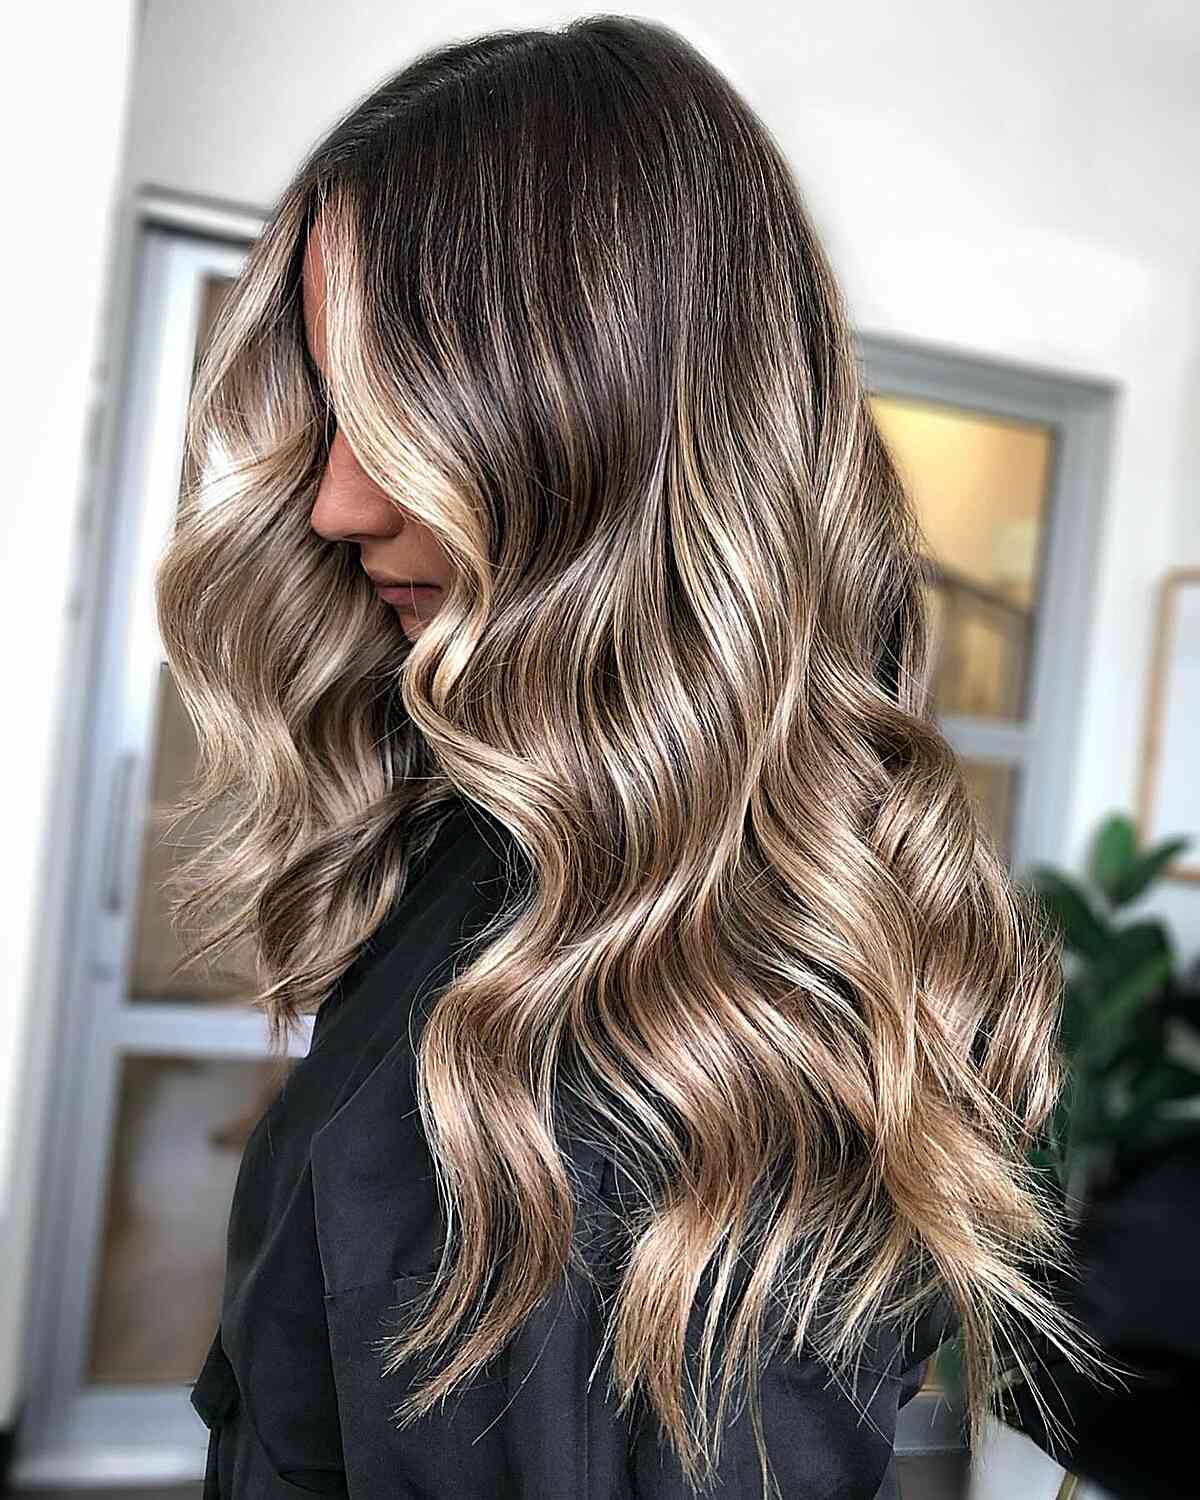 Long-Length Glossy Bronde Hair with Money Pieces